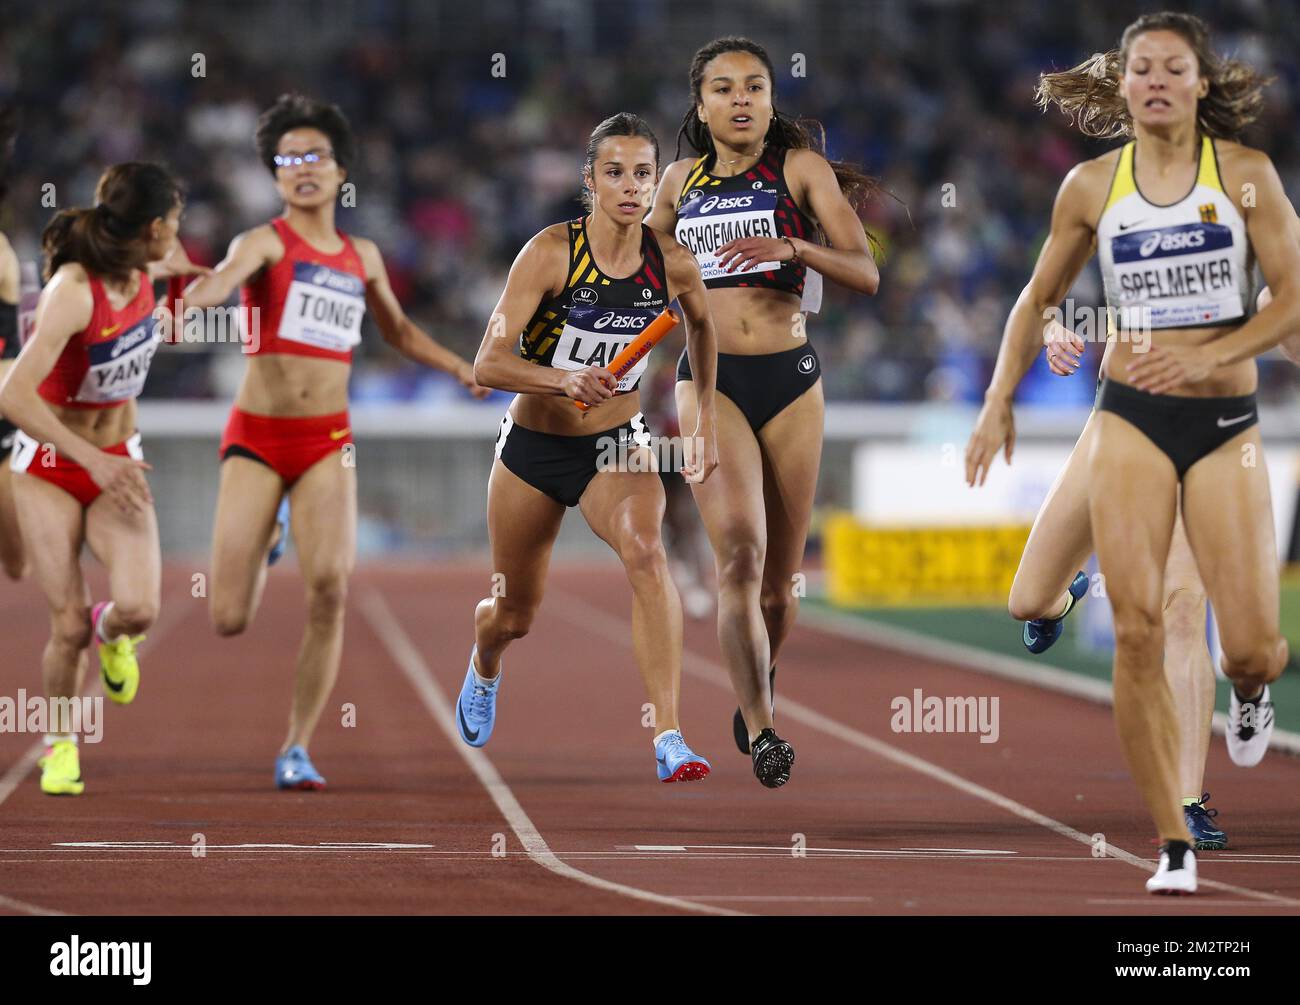 Camille Laus of Belgium receives the baton from teammate Liefde Schoemaker  during the women 4x400m B-final at the IAAF World Relays athletics event at  Nissan Stadium in Yokohama, Japan, Sunday 12 May